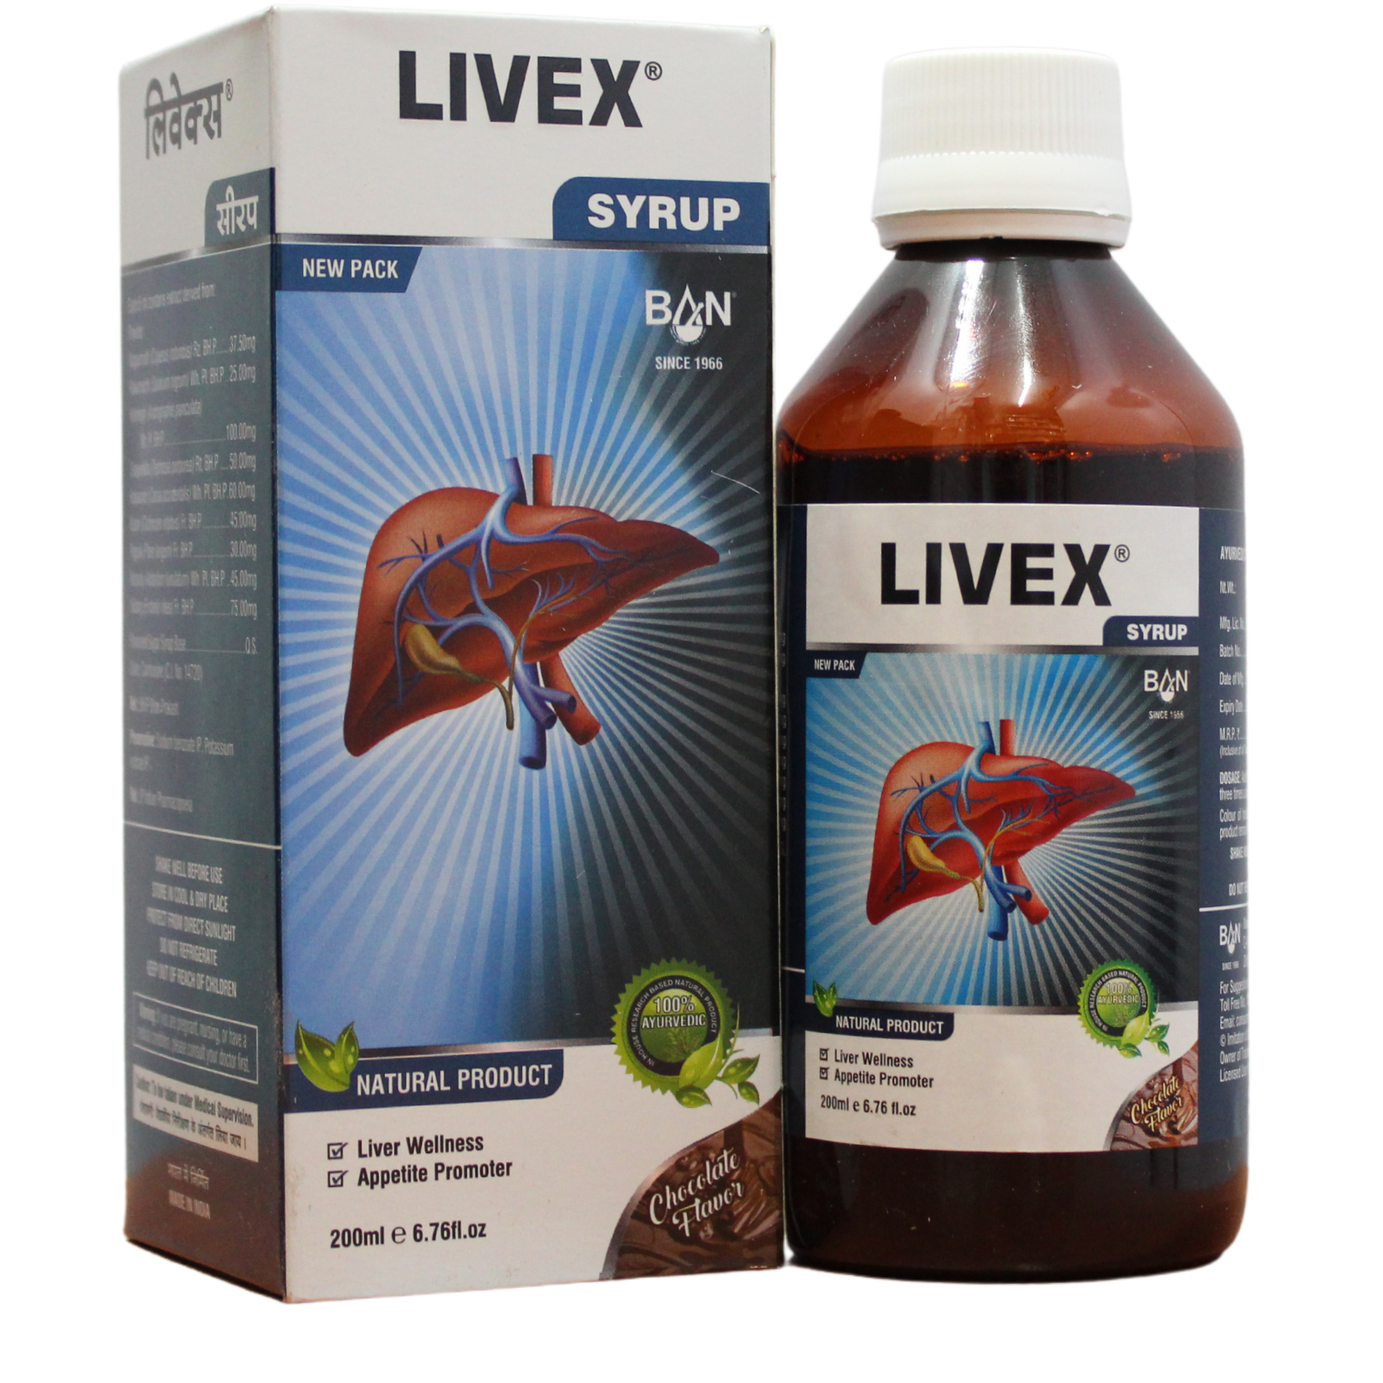 Shop Livex Syrup 200ml at price 110.00 from Banlabs Online - Ayush Care